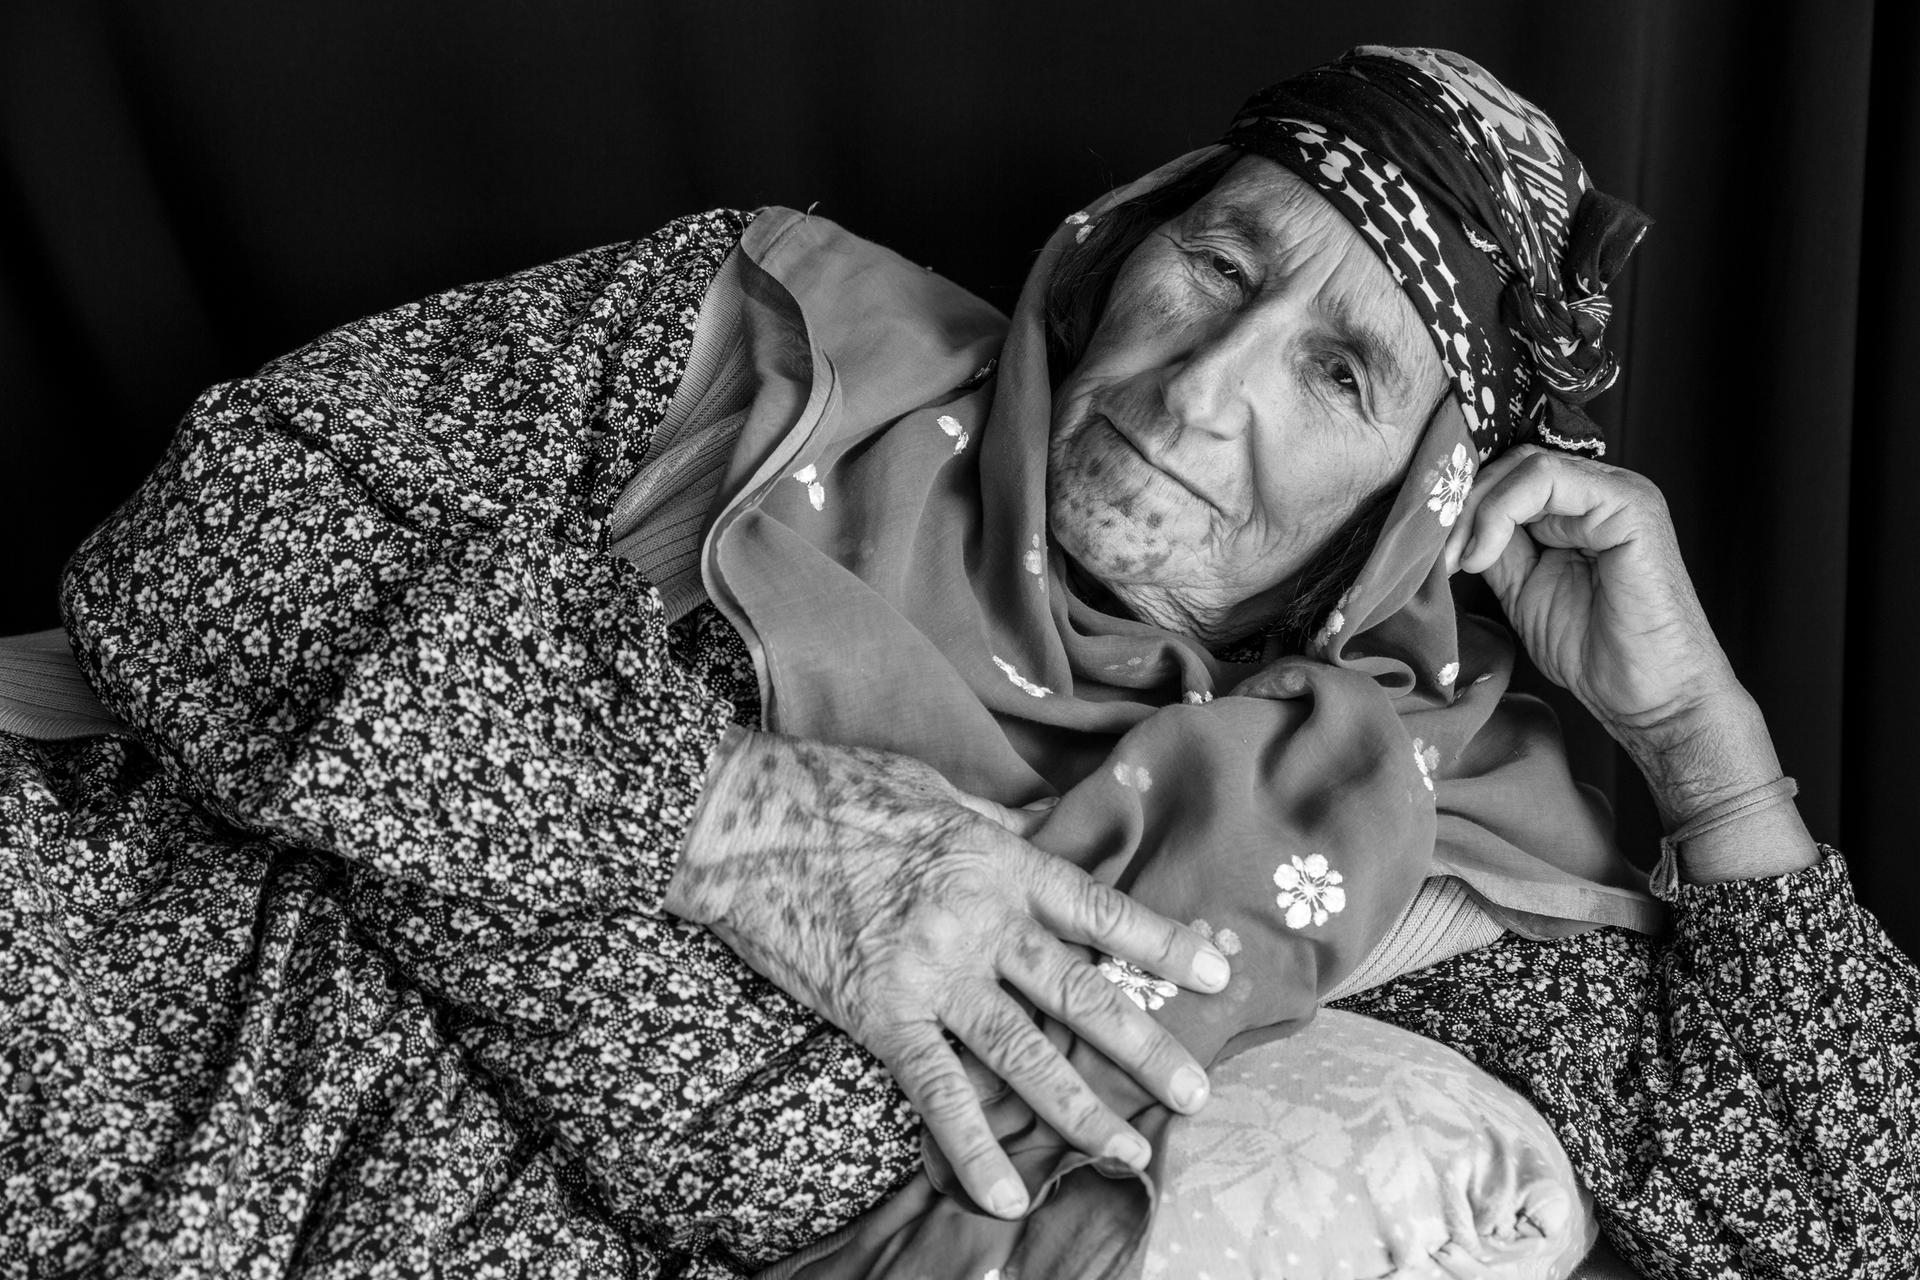 Safi Haso, about 70 years old, from Girik village of Kobani. "We are probably the last generation that has tattoos," she says. "All Kurdish women had them." In addition to facial, hand and neck tattoos, Haso has tattooed her own breast with circles around